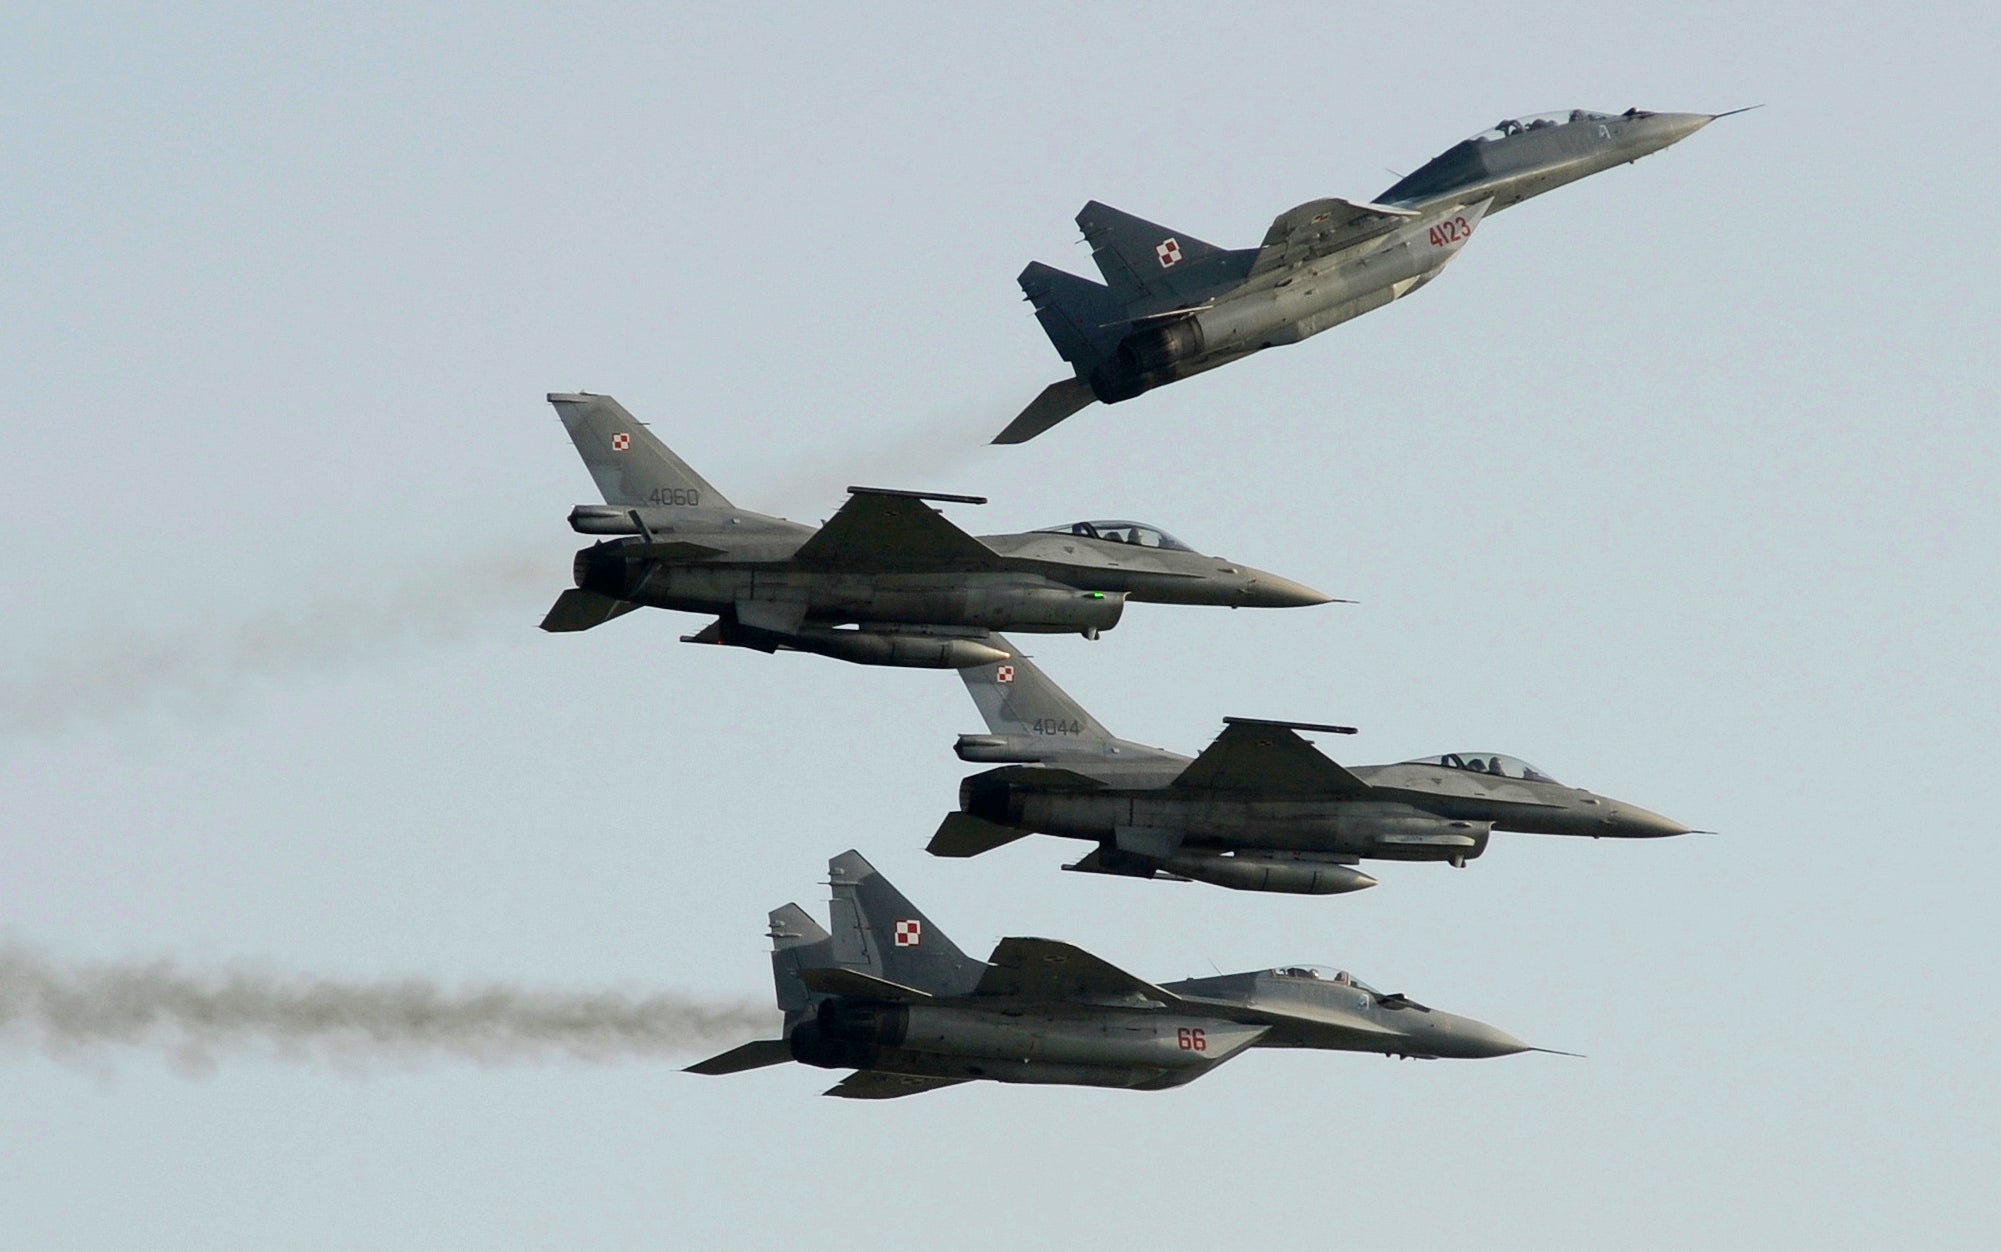 Two Polish Air Force Russian made Mig 29's fly above and below two Polish Air Force U.S. made F-16's fighter jets during an air show in Poland